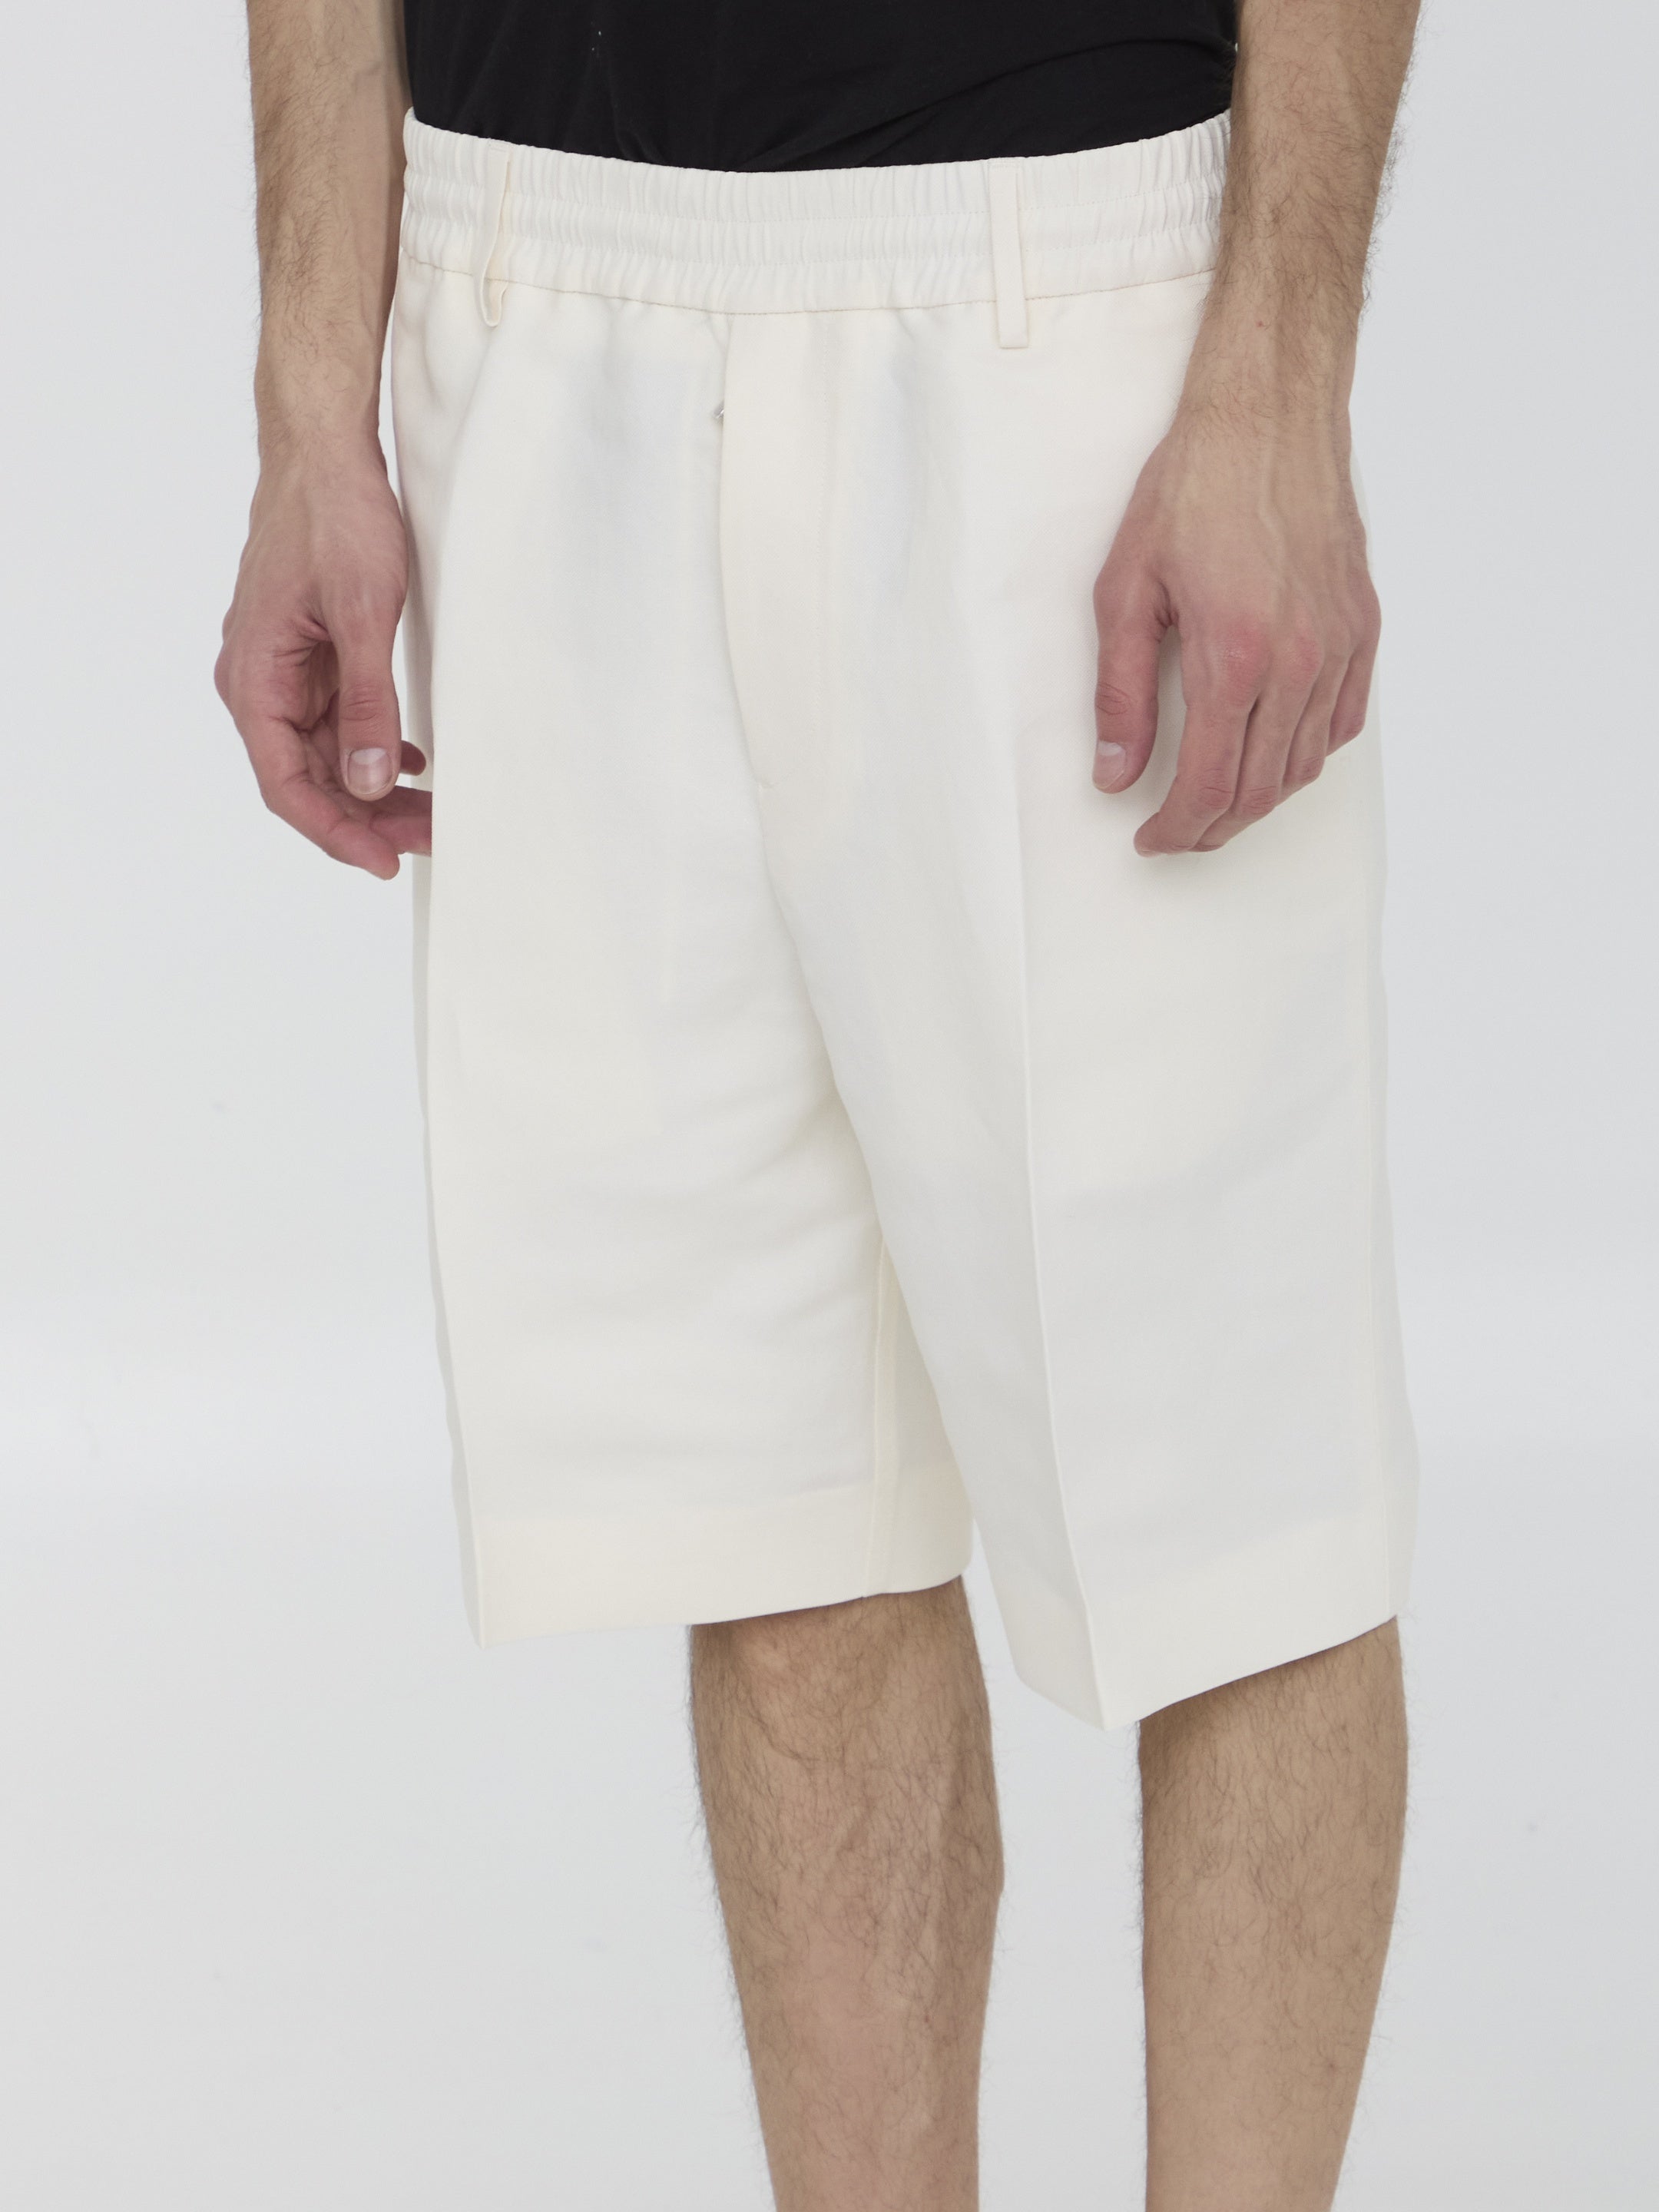 BURBERRY-OUTLET-SALE-Tailored-bermuda-shorts-Hosen-ARCHIVE-COLLECTION-2.jpg